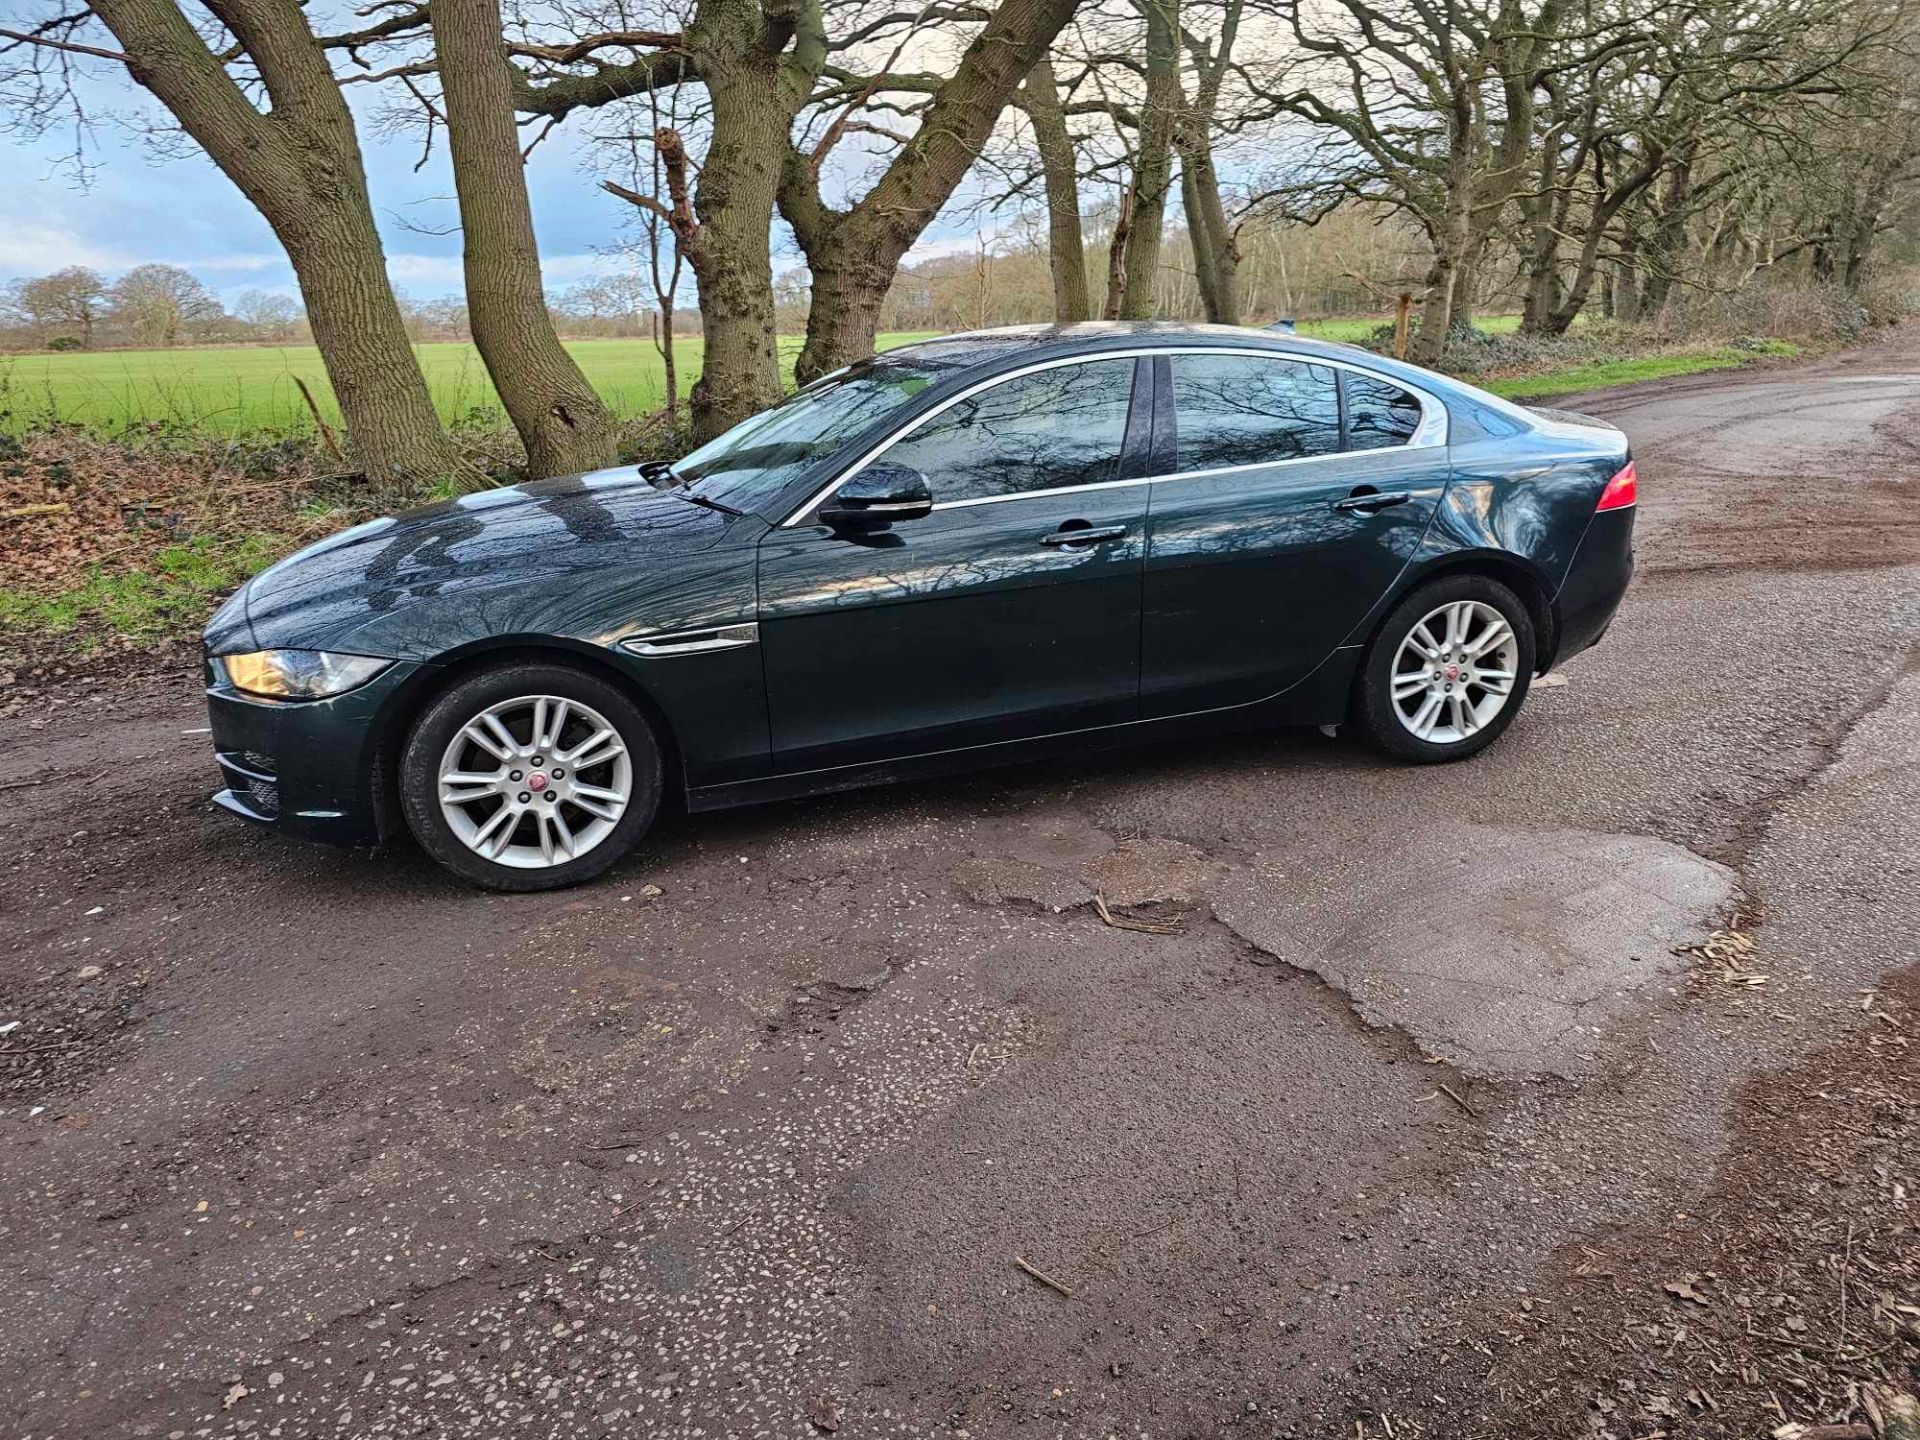 2015 65 JAGUAR XE SALOON - STARTS AND DRIVES BUT ENGINE IS NOISY - ALLOY WHEELS - 5 SERVICES. - Image 9 of 10